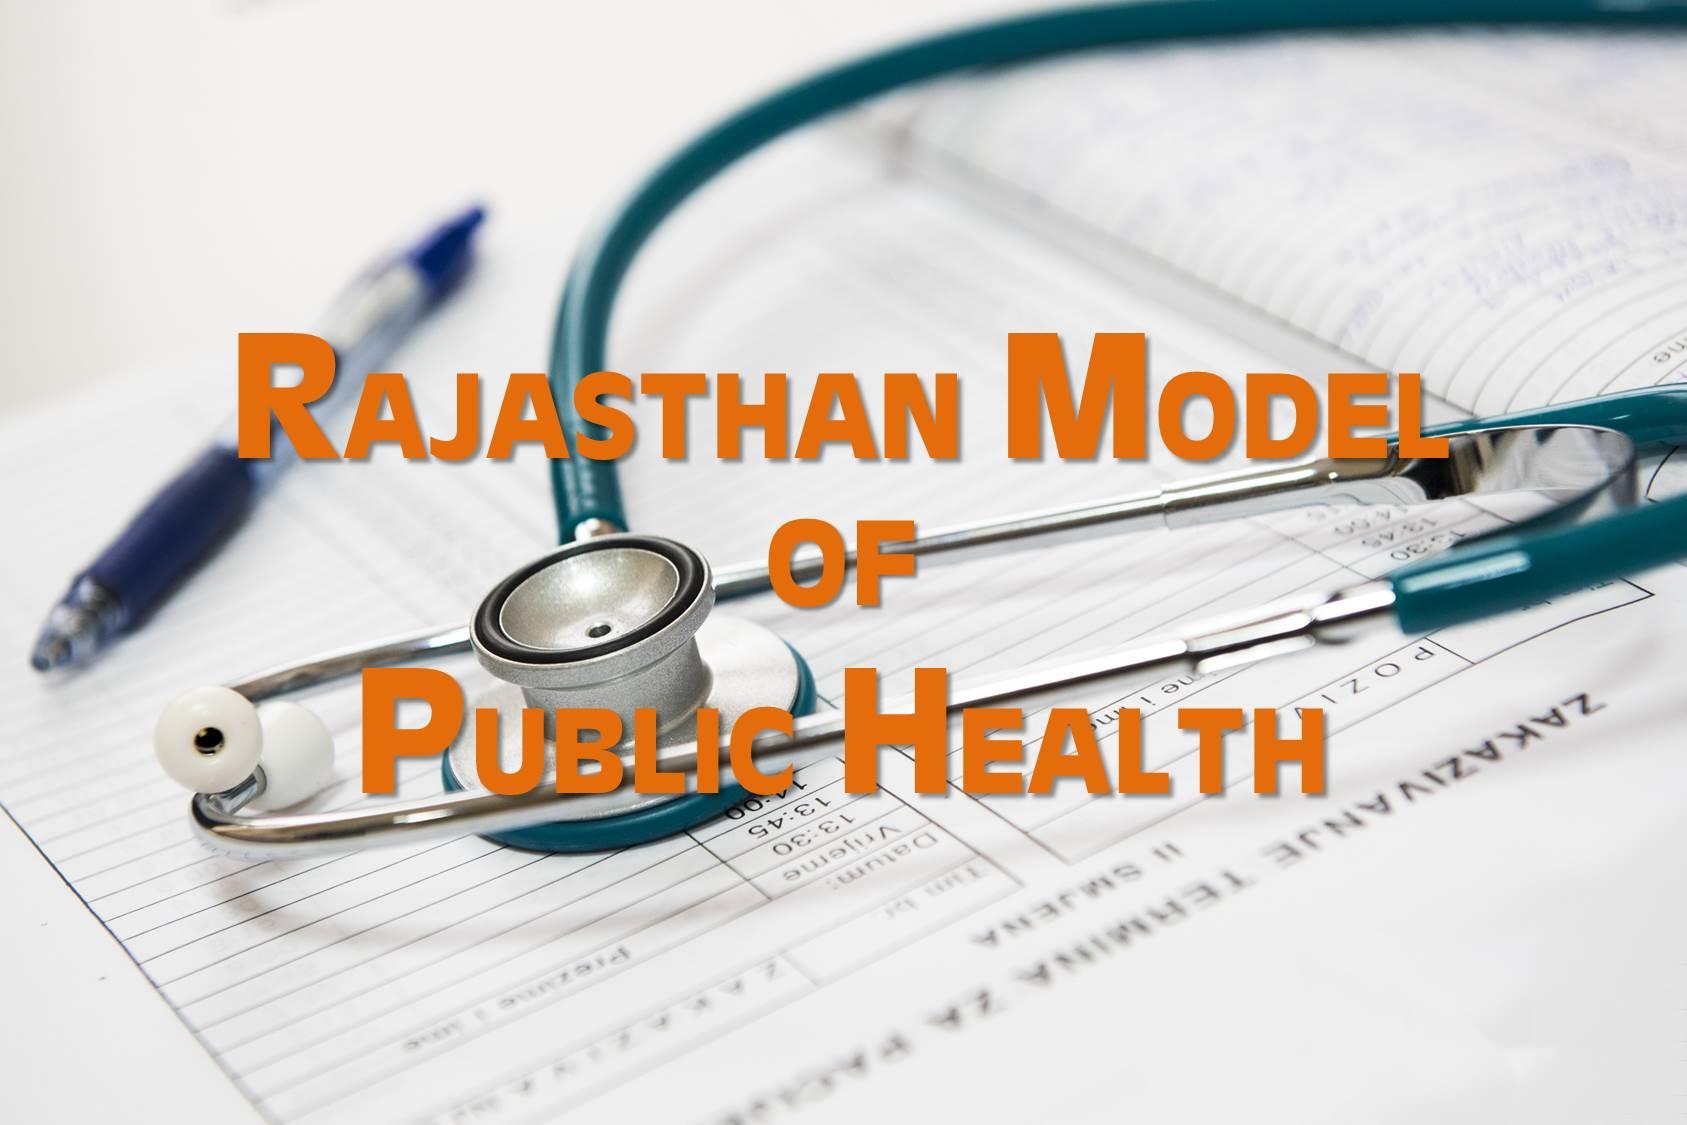 Here is what you need to know about the Rajasthan Model of Public Health